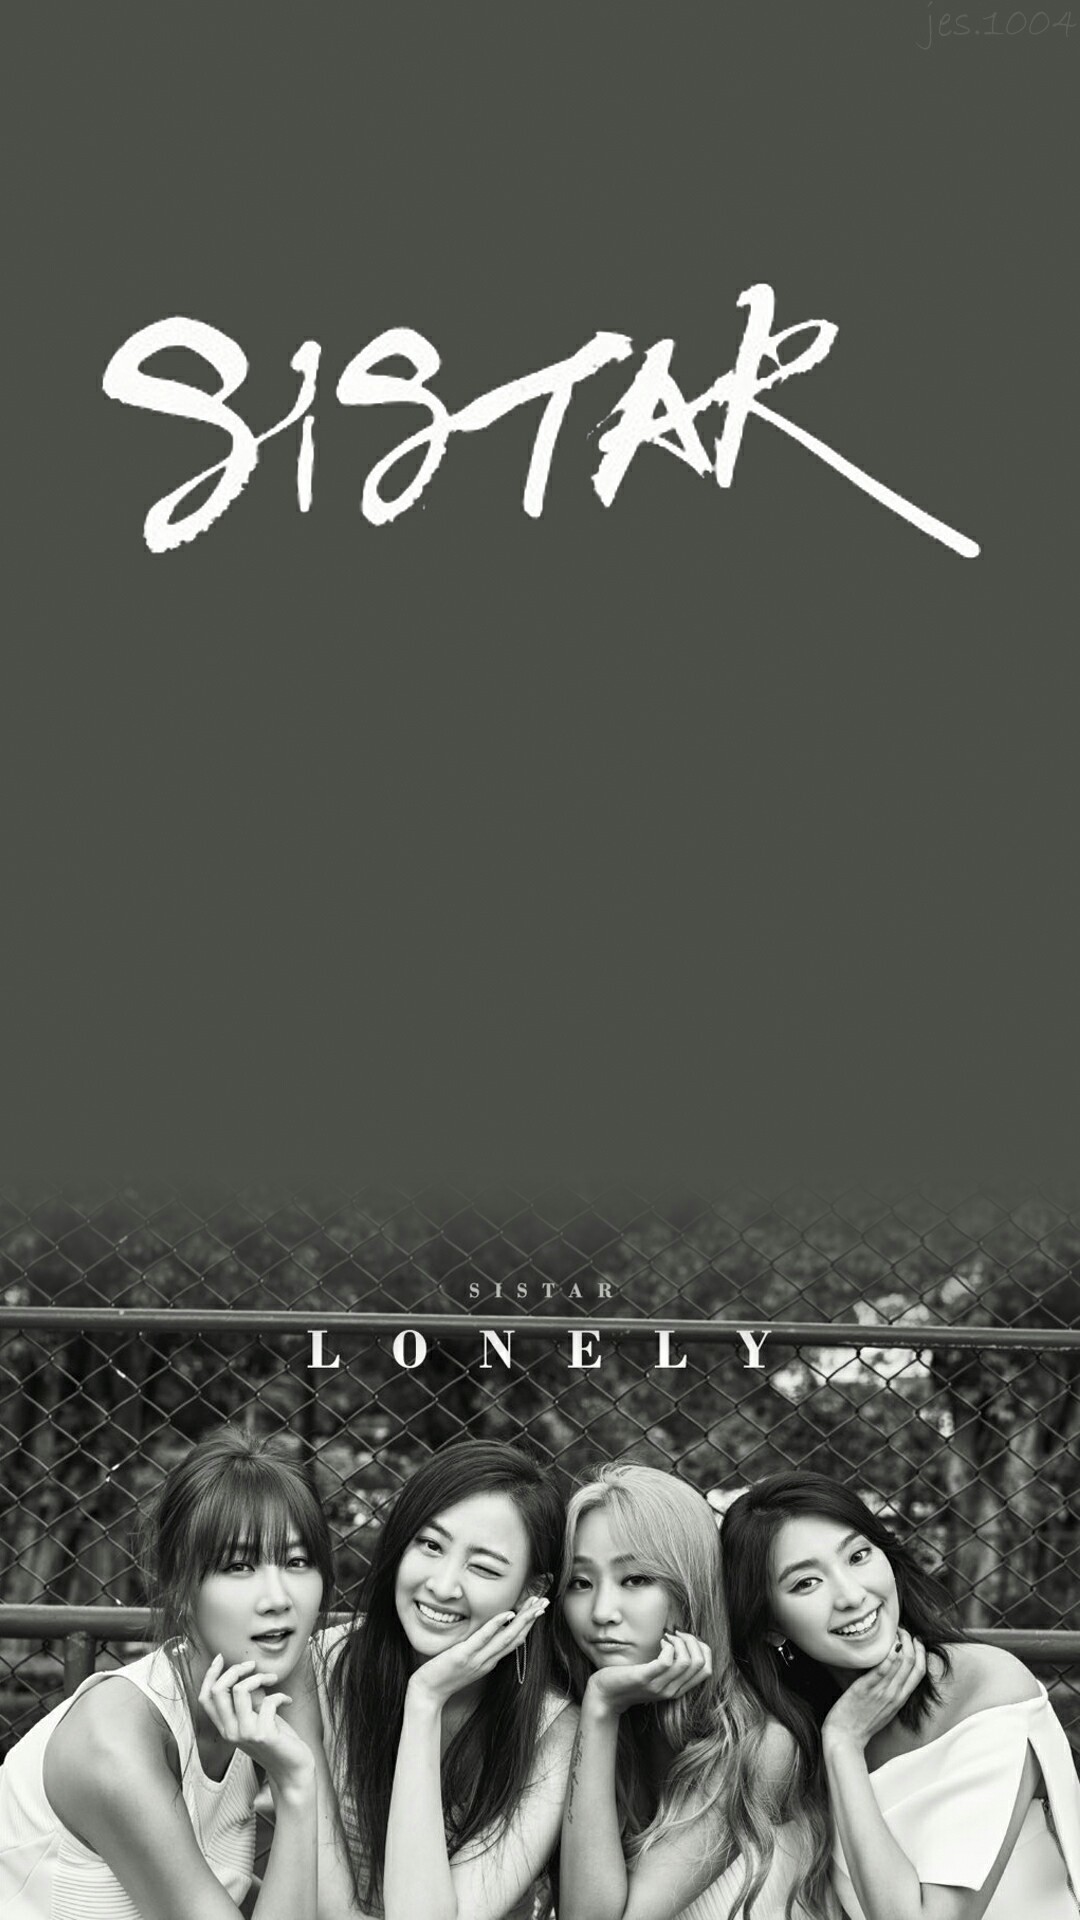 1080x1920 SISTAR wallpaper // Do take out with full credits^^